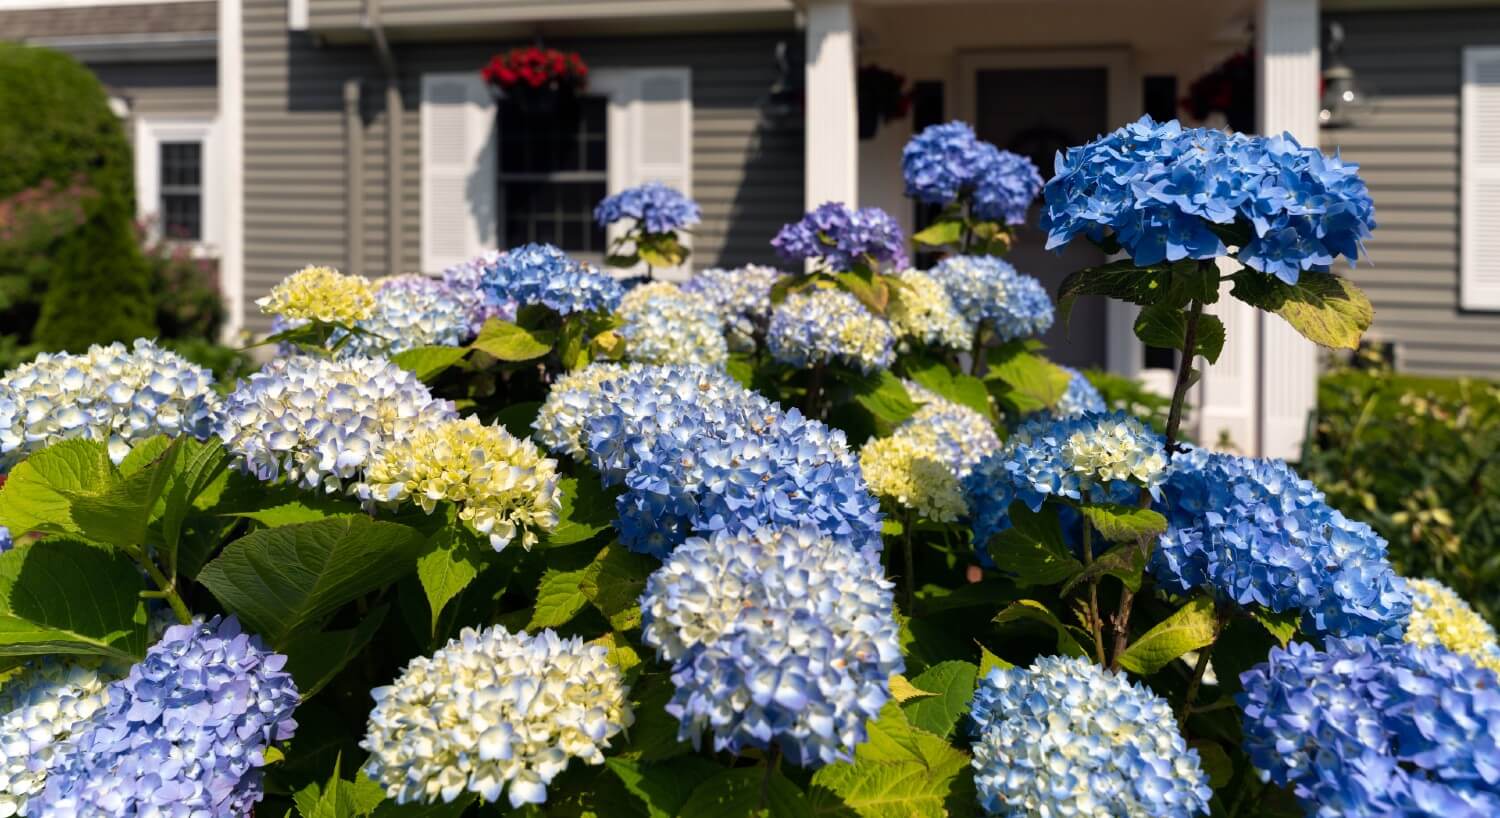 Large blue hydrangeas in full bloom in front of a home